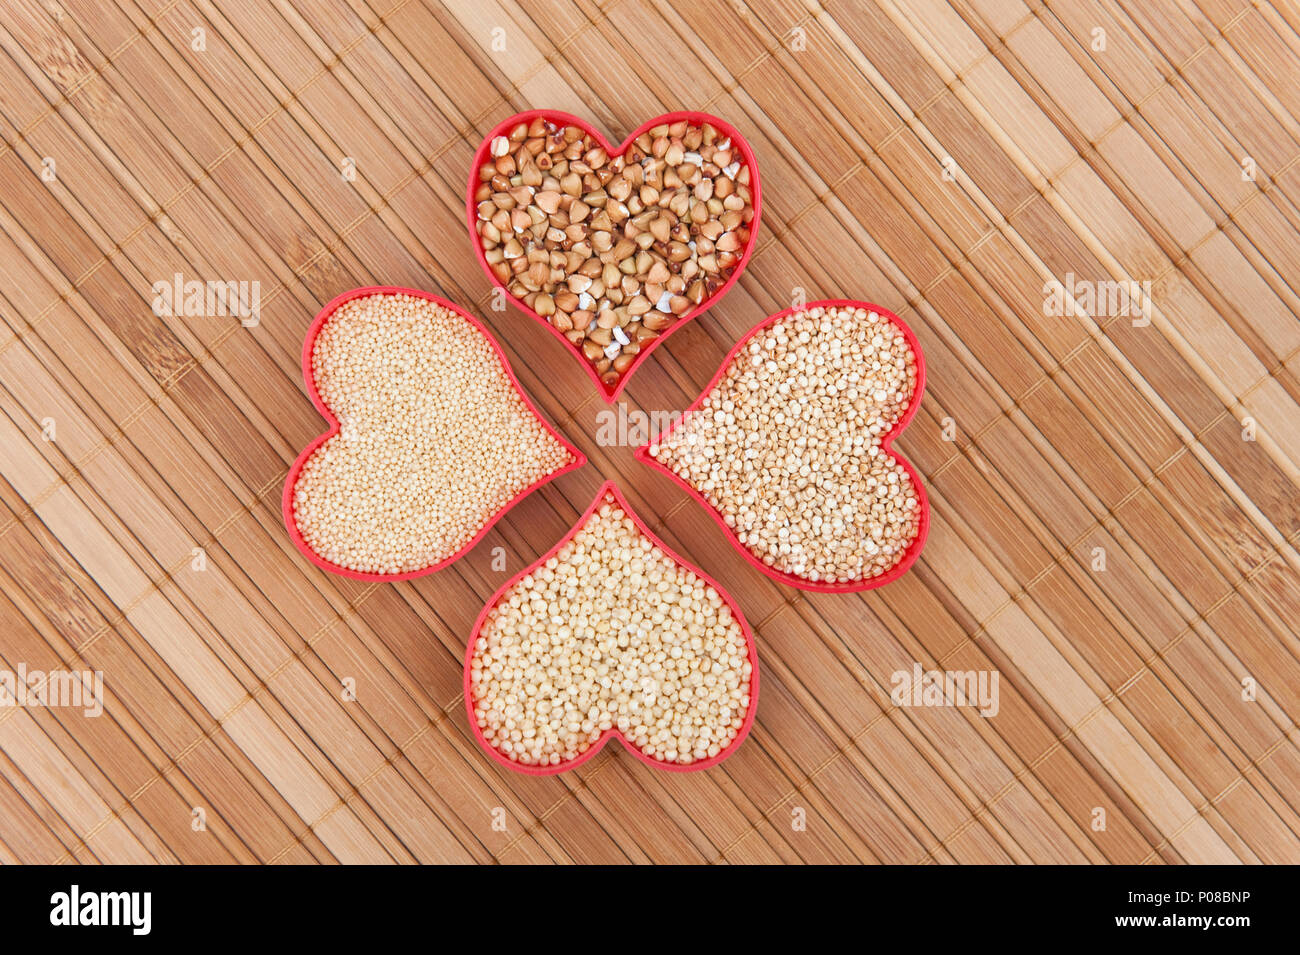 Gluten-free super seeds millet, buckwheat, amaranth and quinoa in red hearts on bamboo Stock Photo